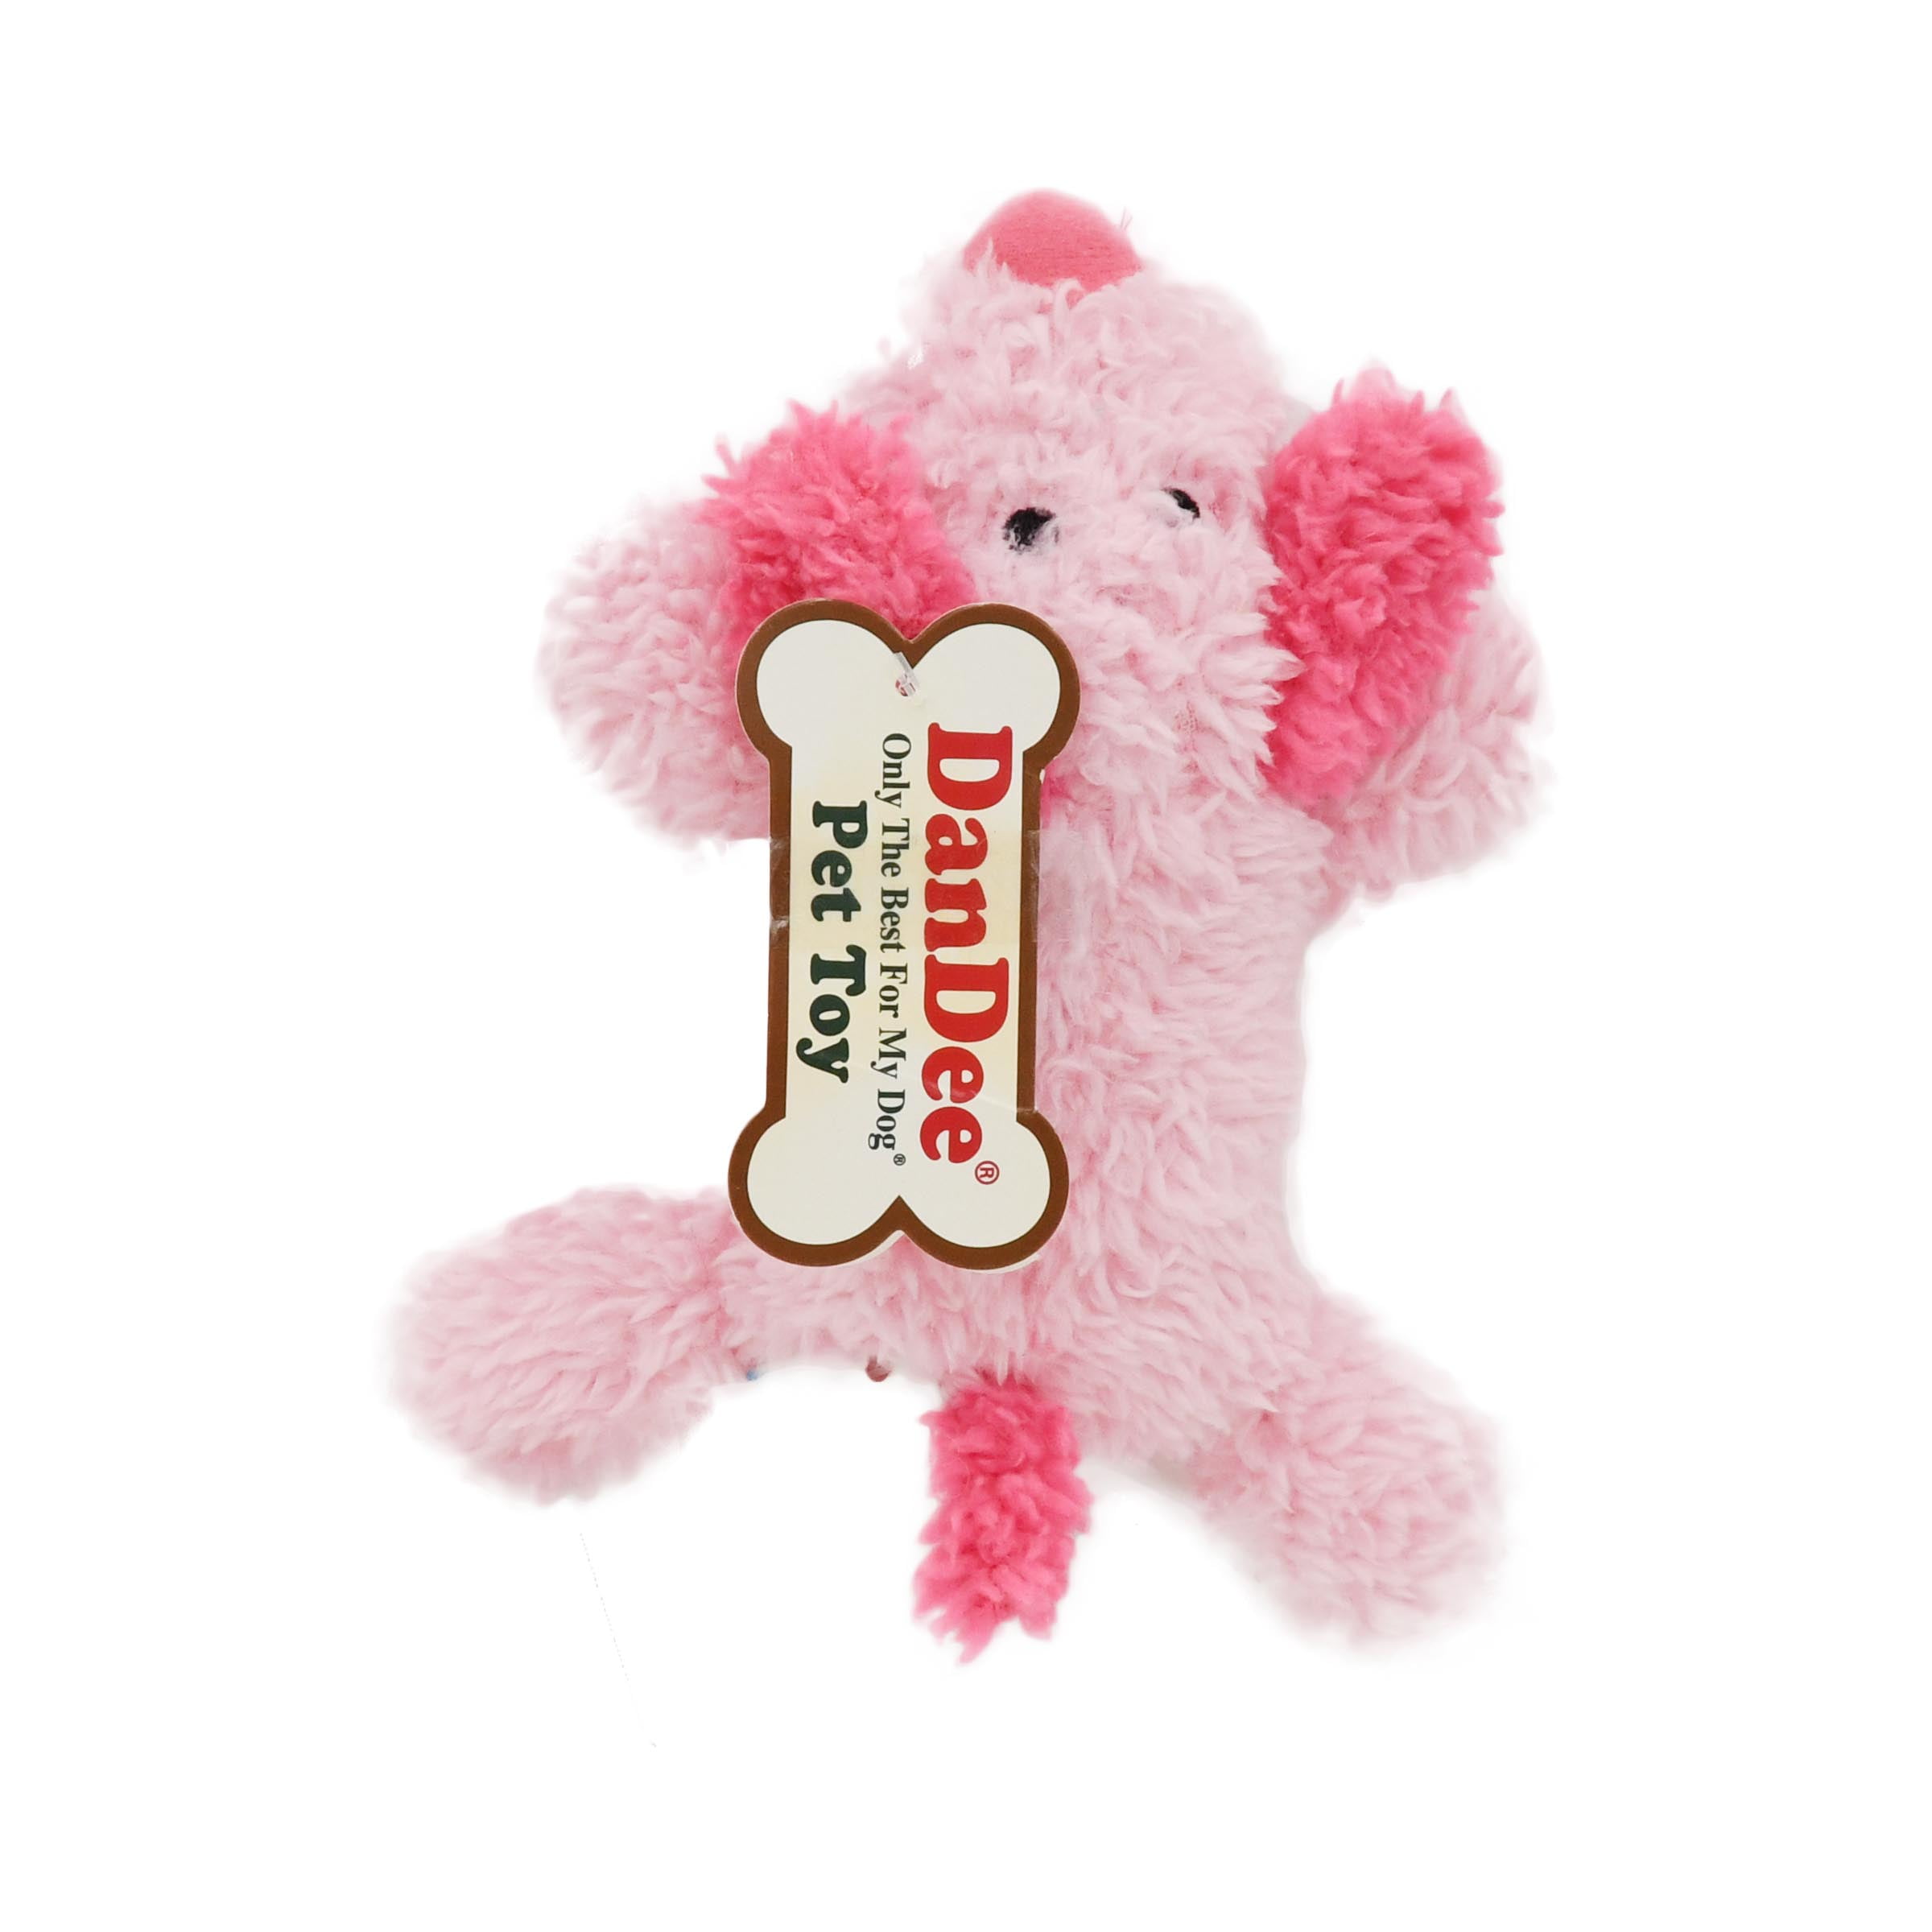 pink squeaky dog toy